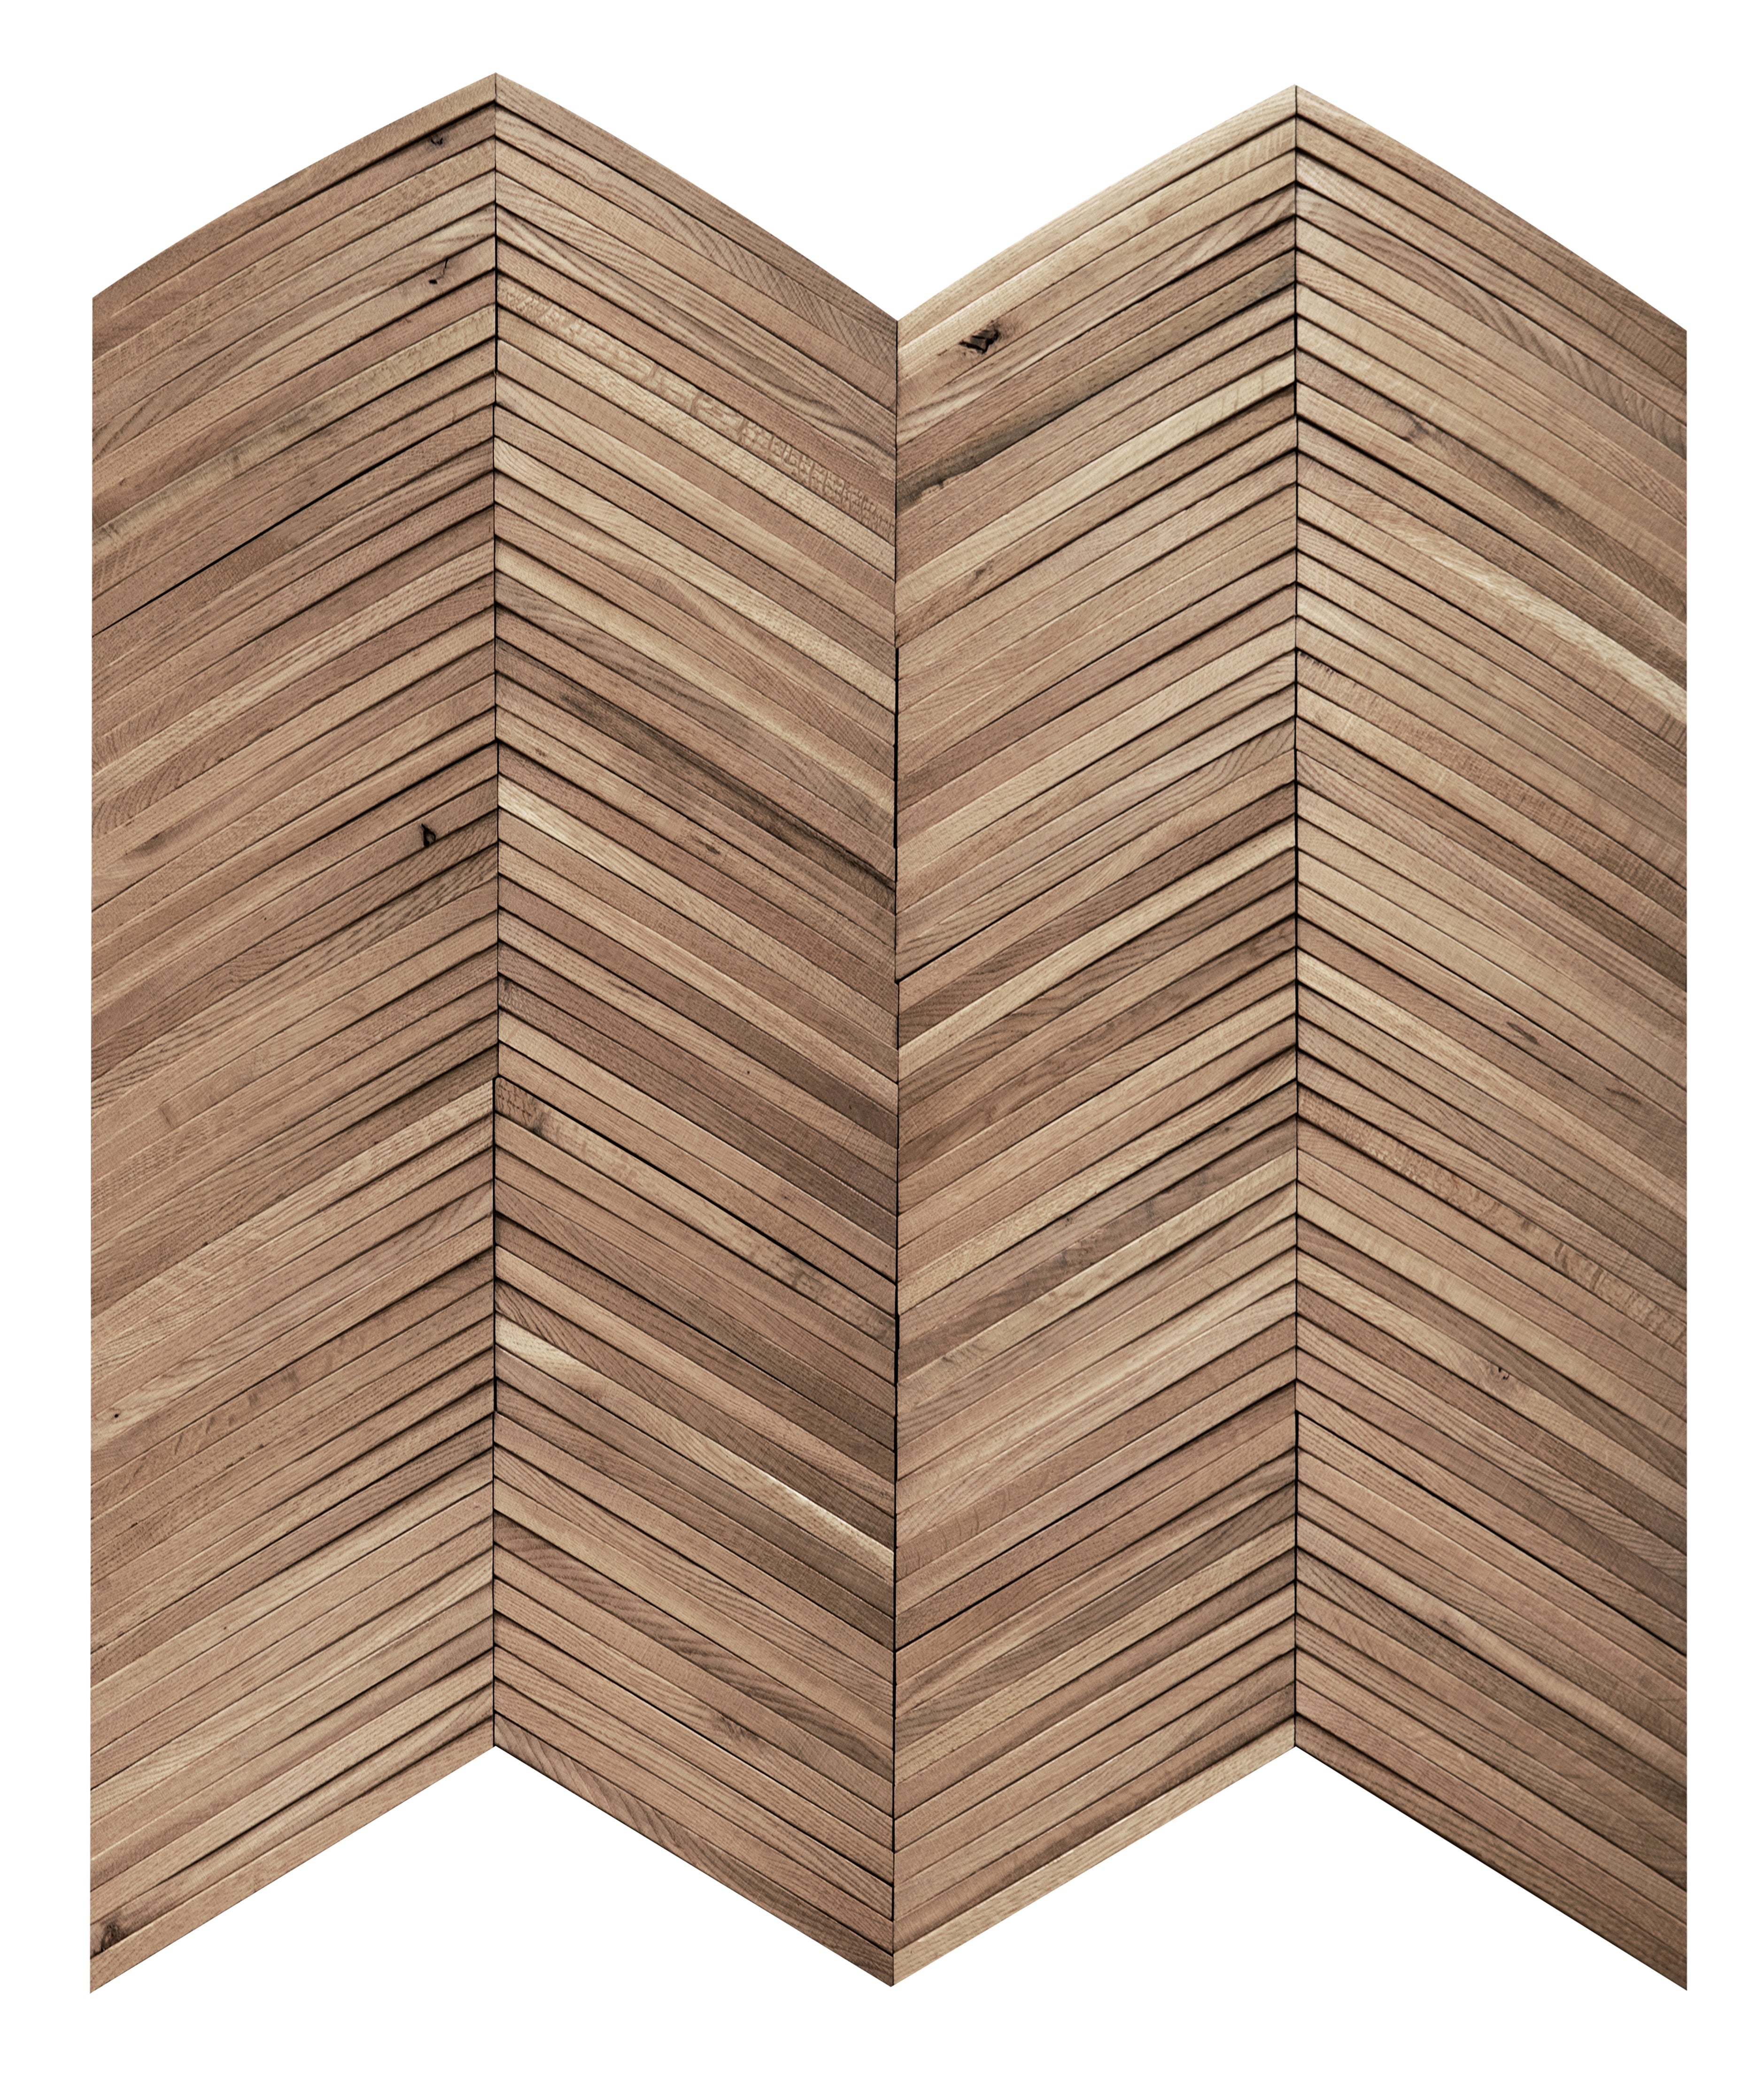 duchateau inceptiv ark chevron lugano oak three dimensional wall natural wood panel matte lacquer for interior use distributed by surface group international